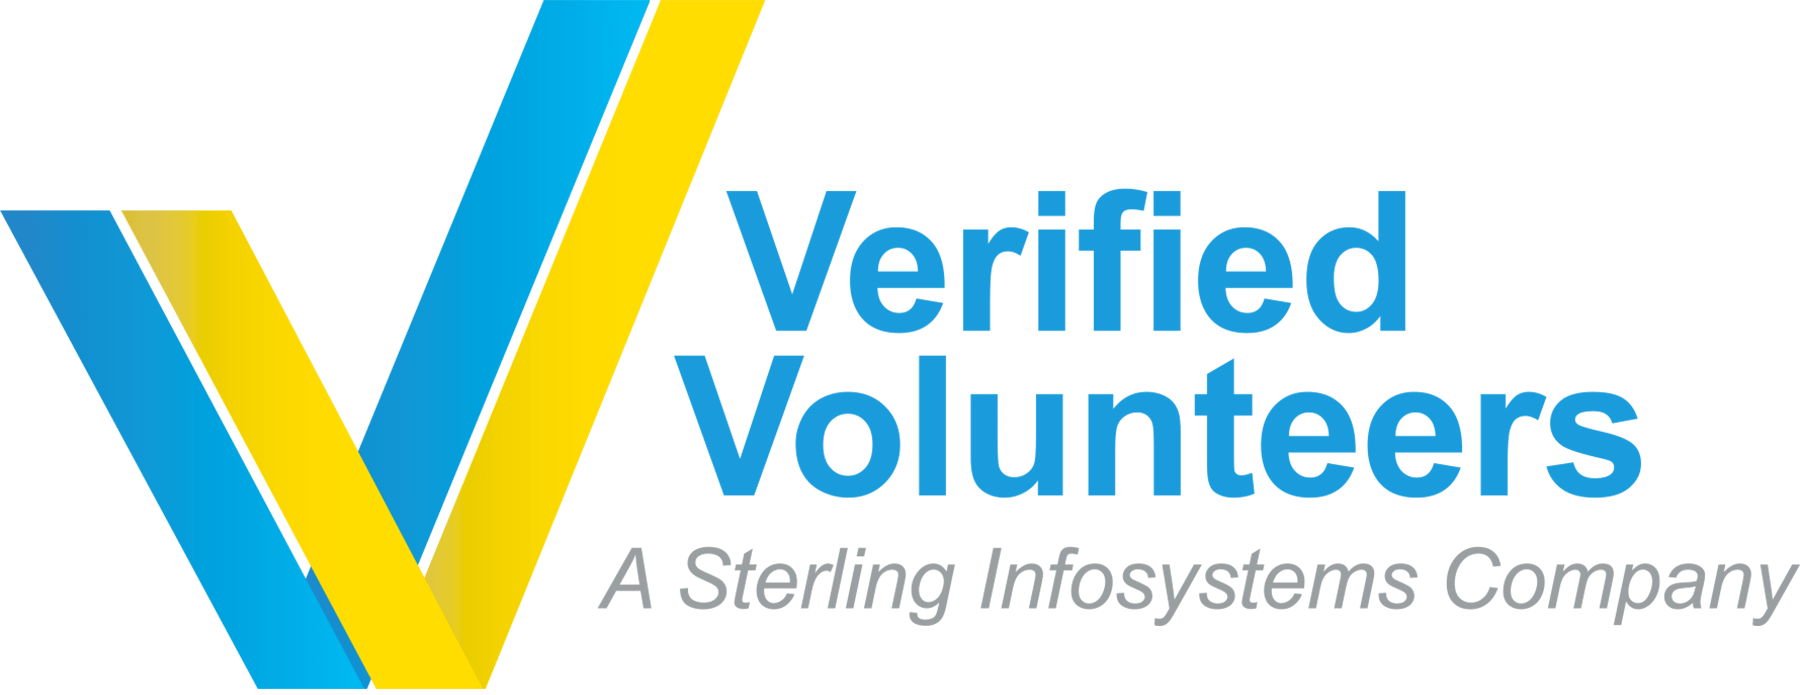 Galaxy Digital Announces New Partnership with Verified Volunteers